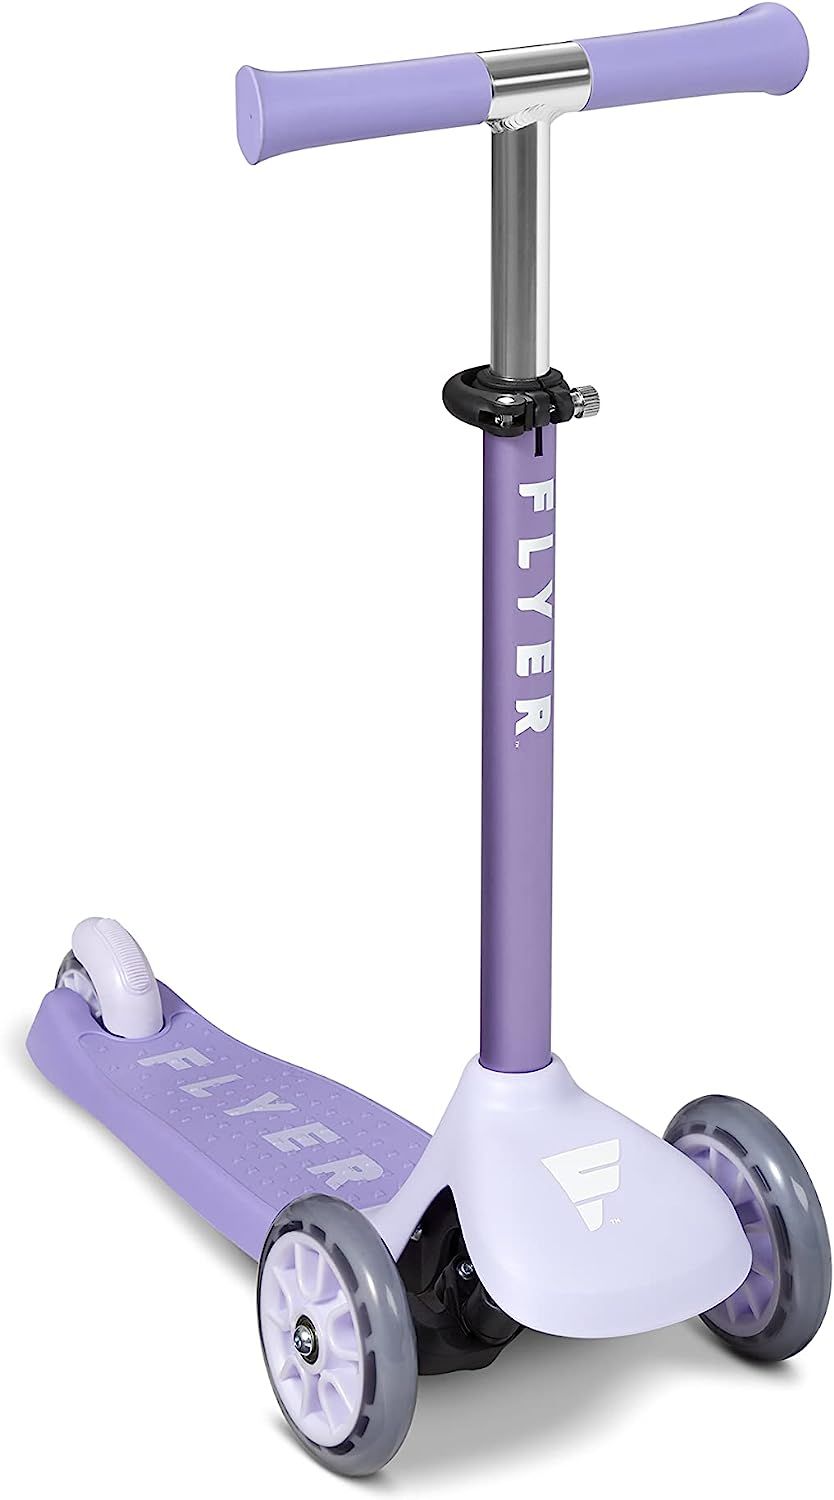 Flyer Glider Jr., EZ Steer Toddler Scooter, Purple, for Kids Ages 2-5 Years Old | Amazon (US)